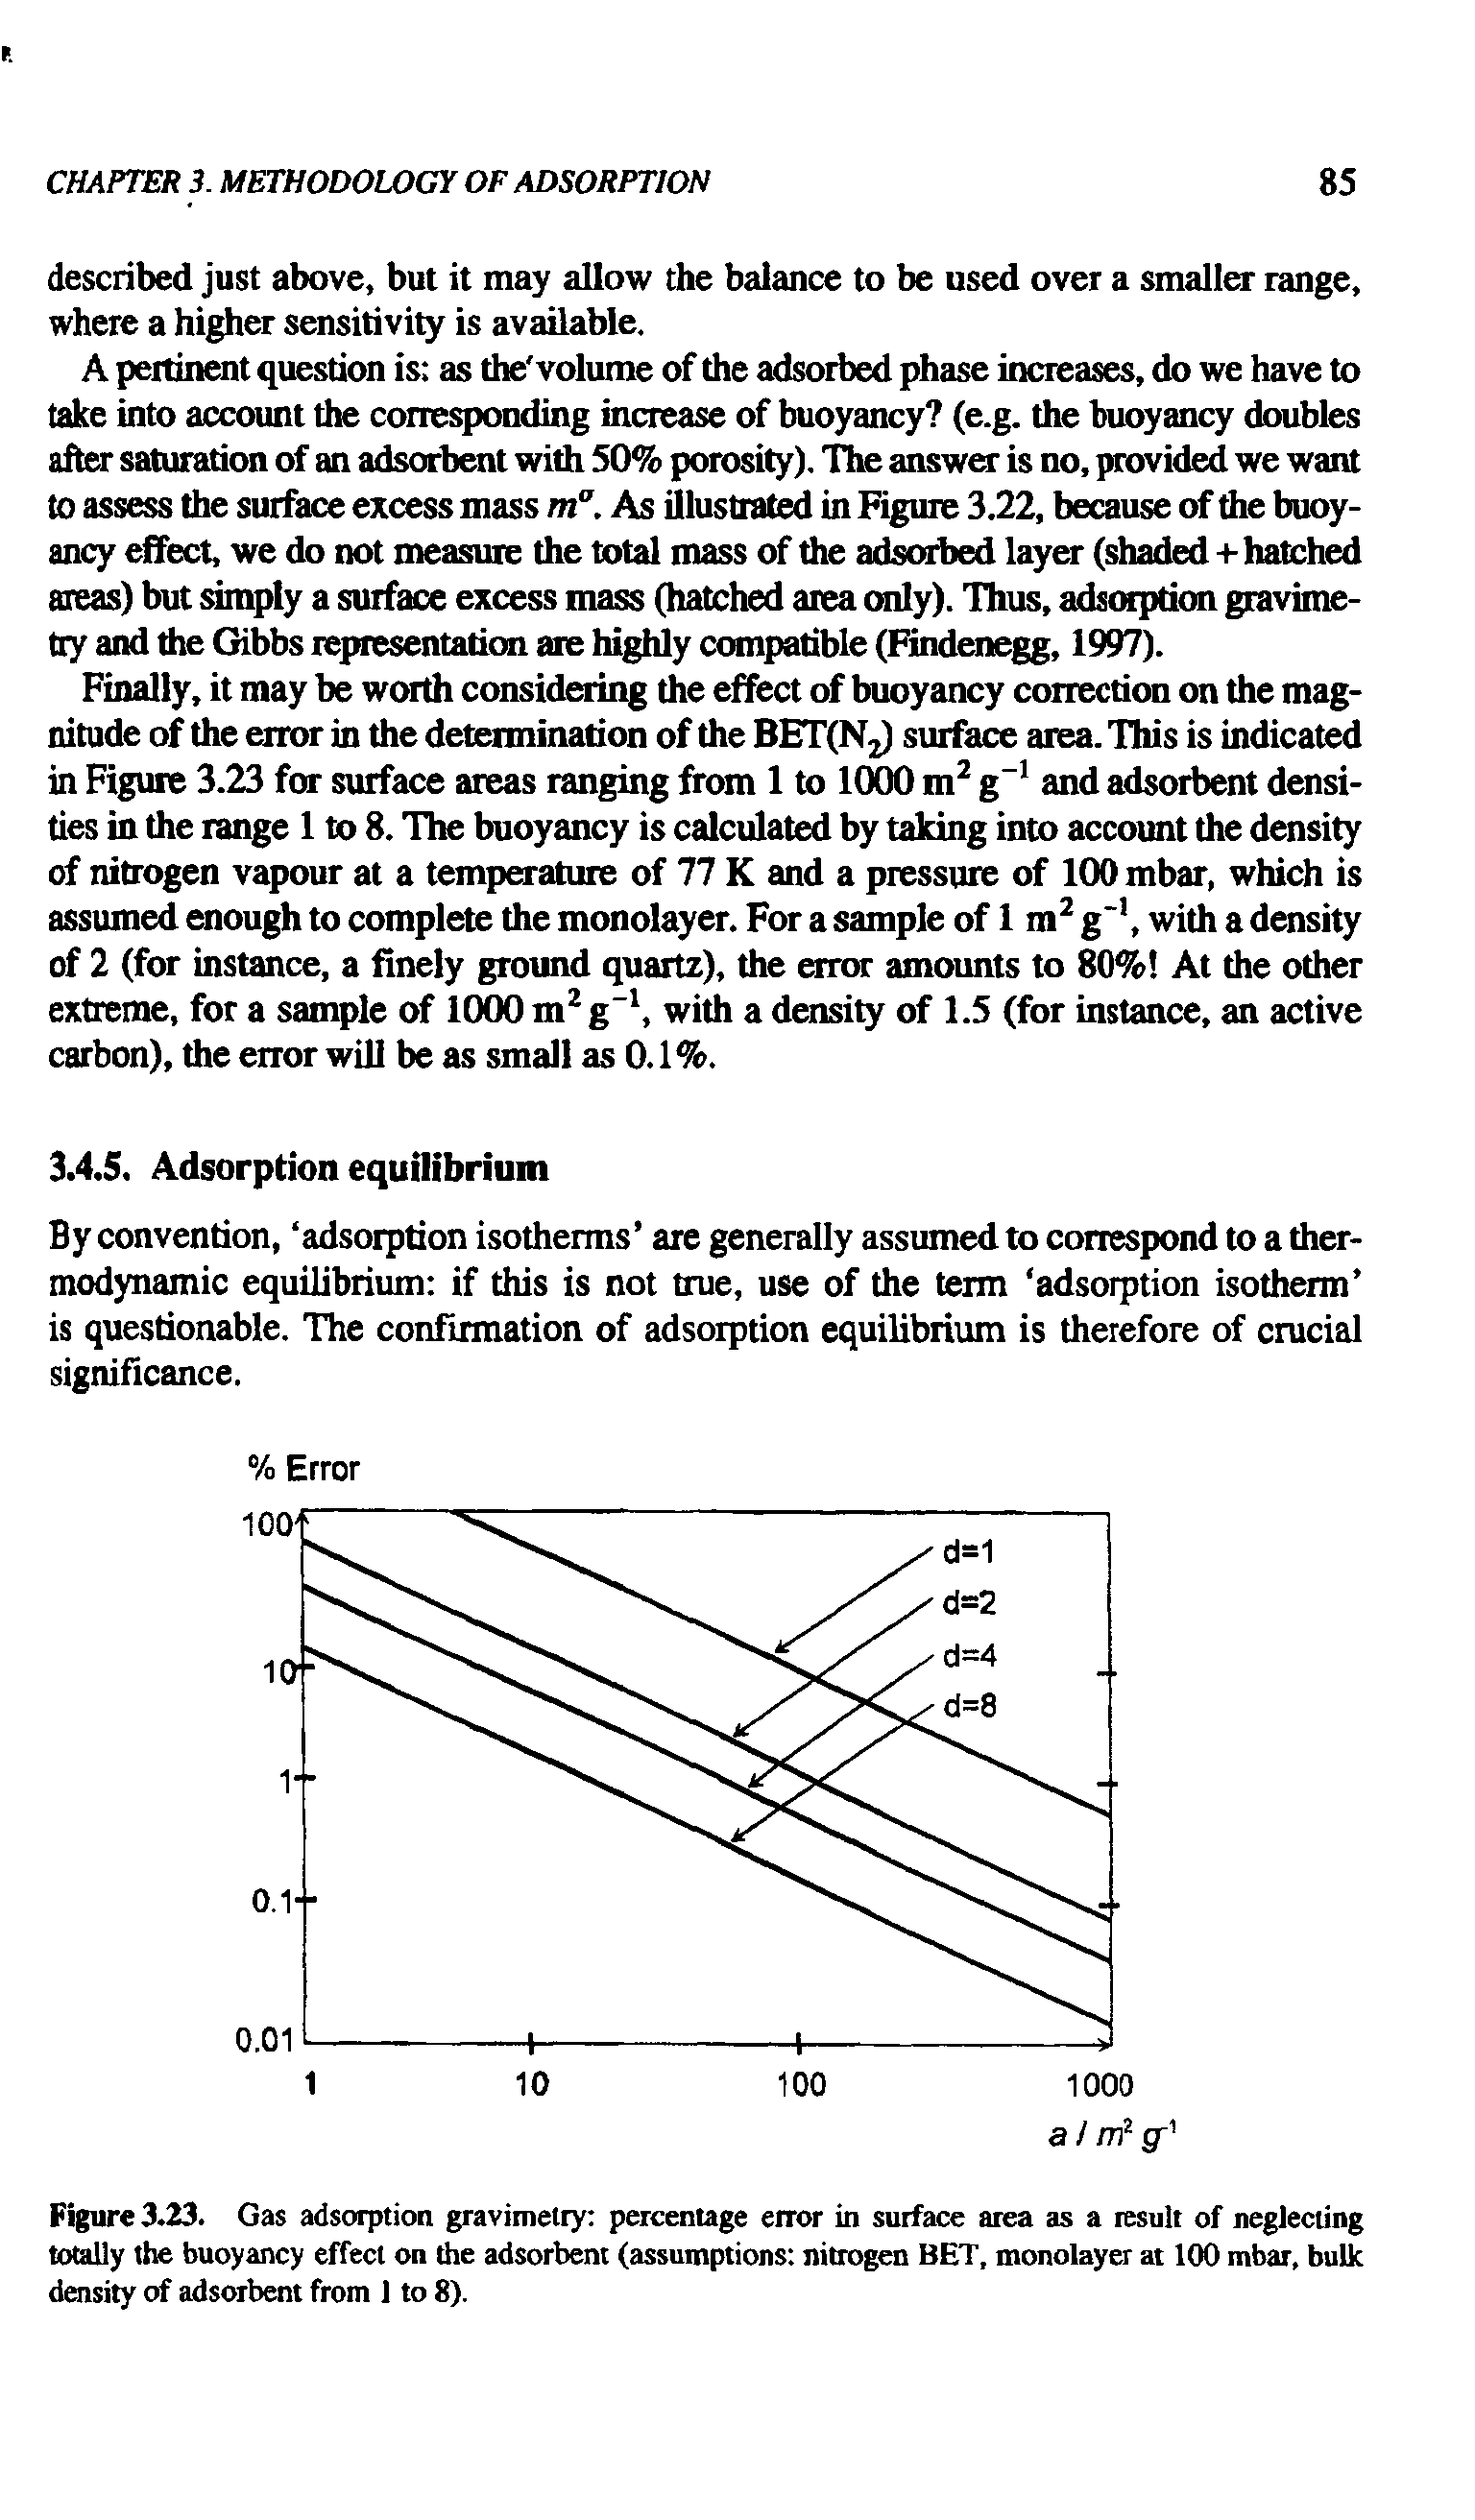 Figure 3.23. Gas adsorption gravimetry percentage enor in surface area as a result of neglecting totally the buoyancy effect on the adsorbent (assumptions nitrogen BET, monolayer at 100 mbar, bulk density of adsorbent from 1 to 8).